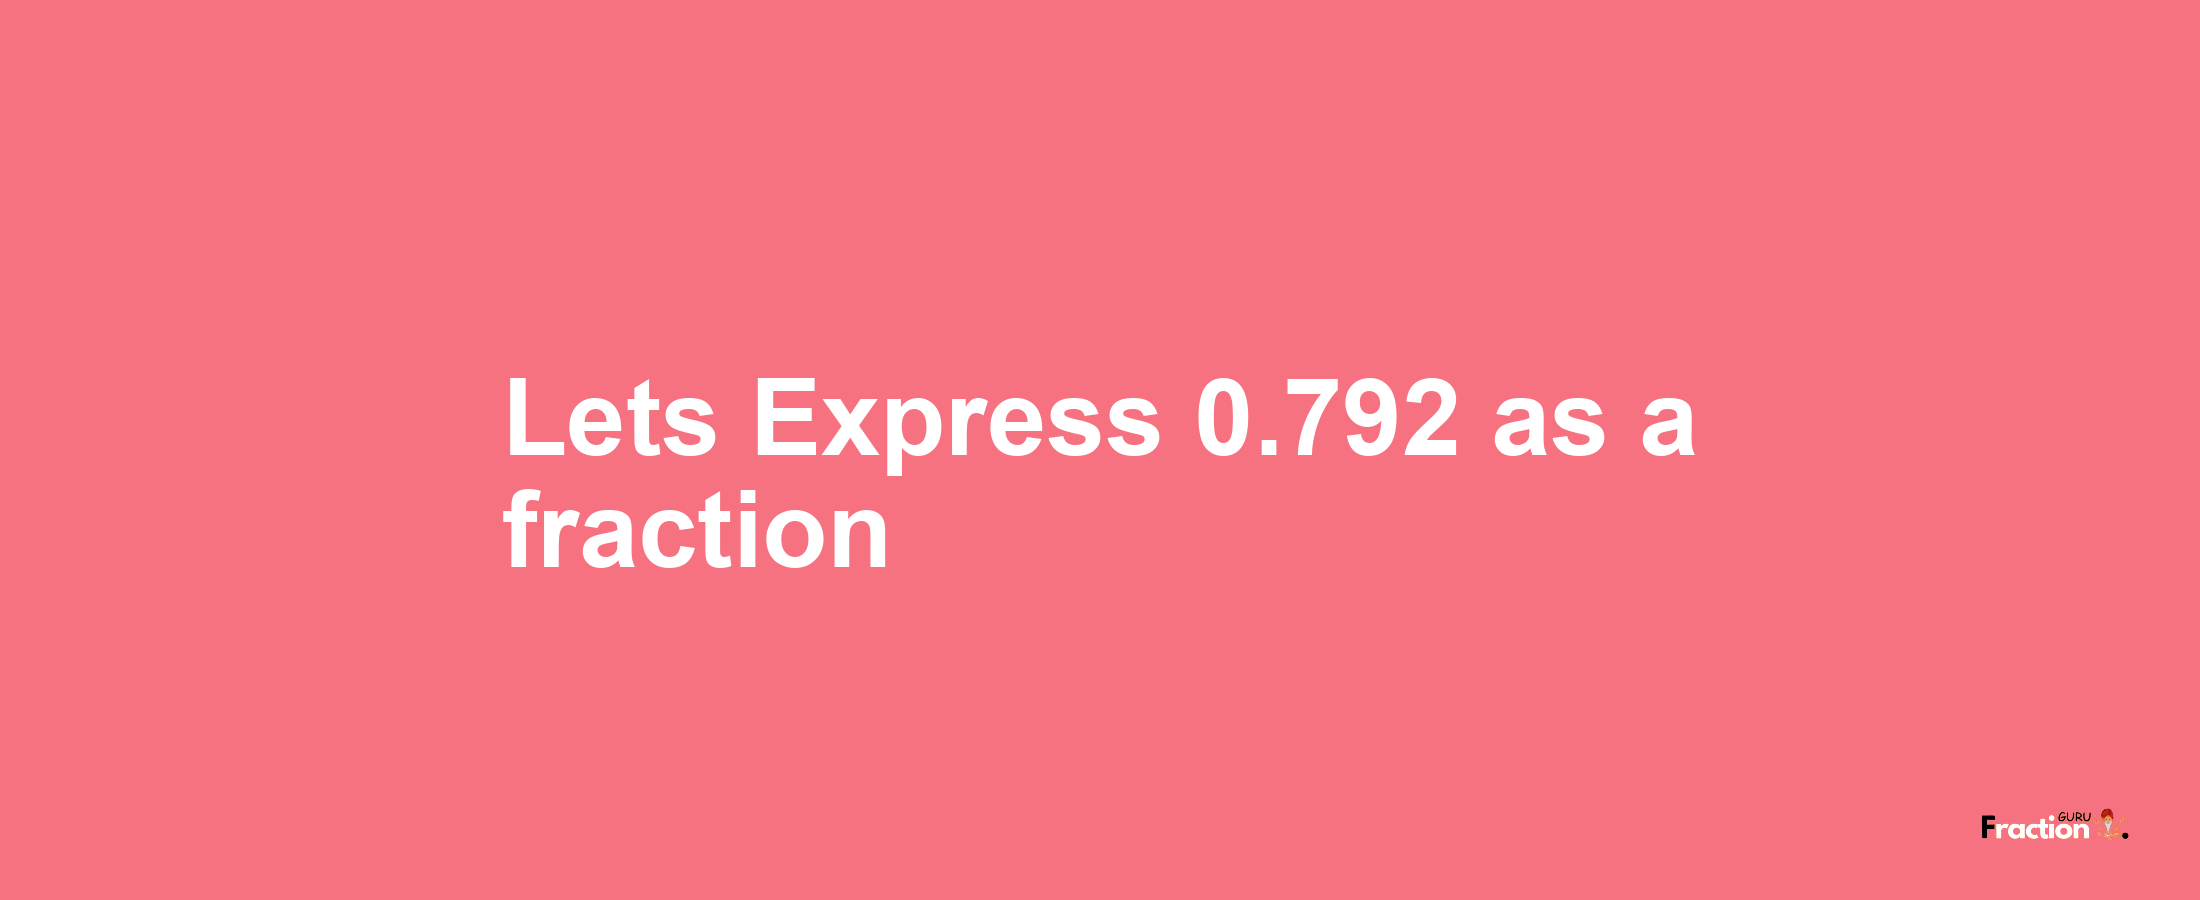 Lets Express 0.792 as afraction